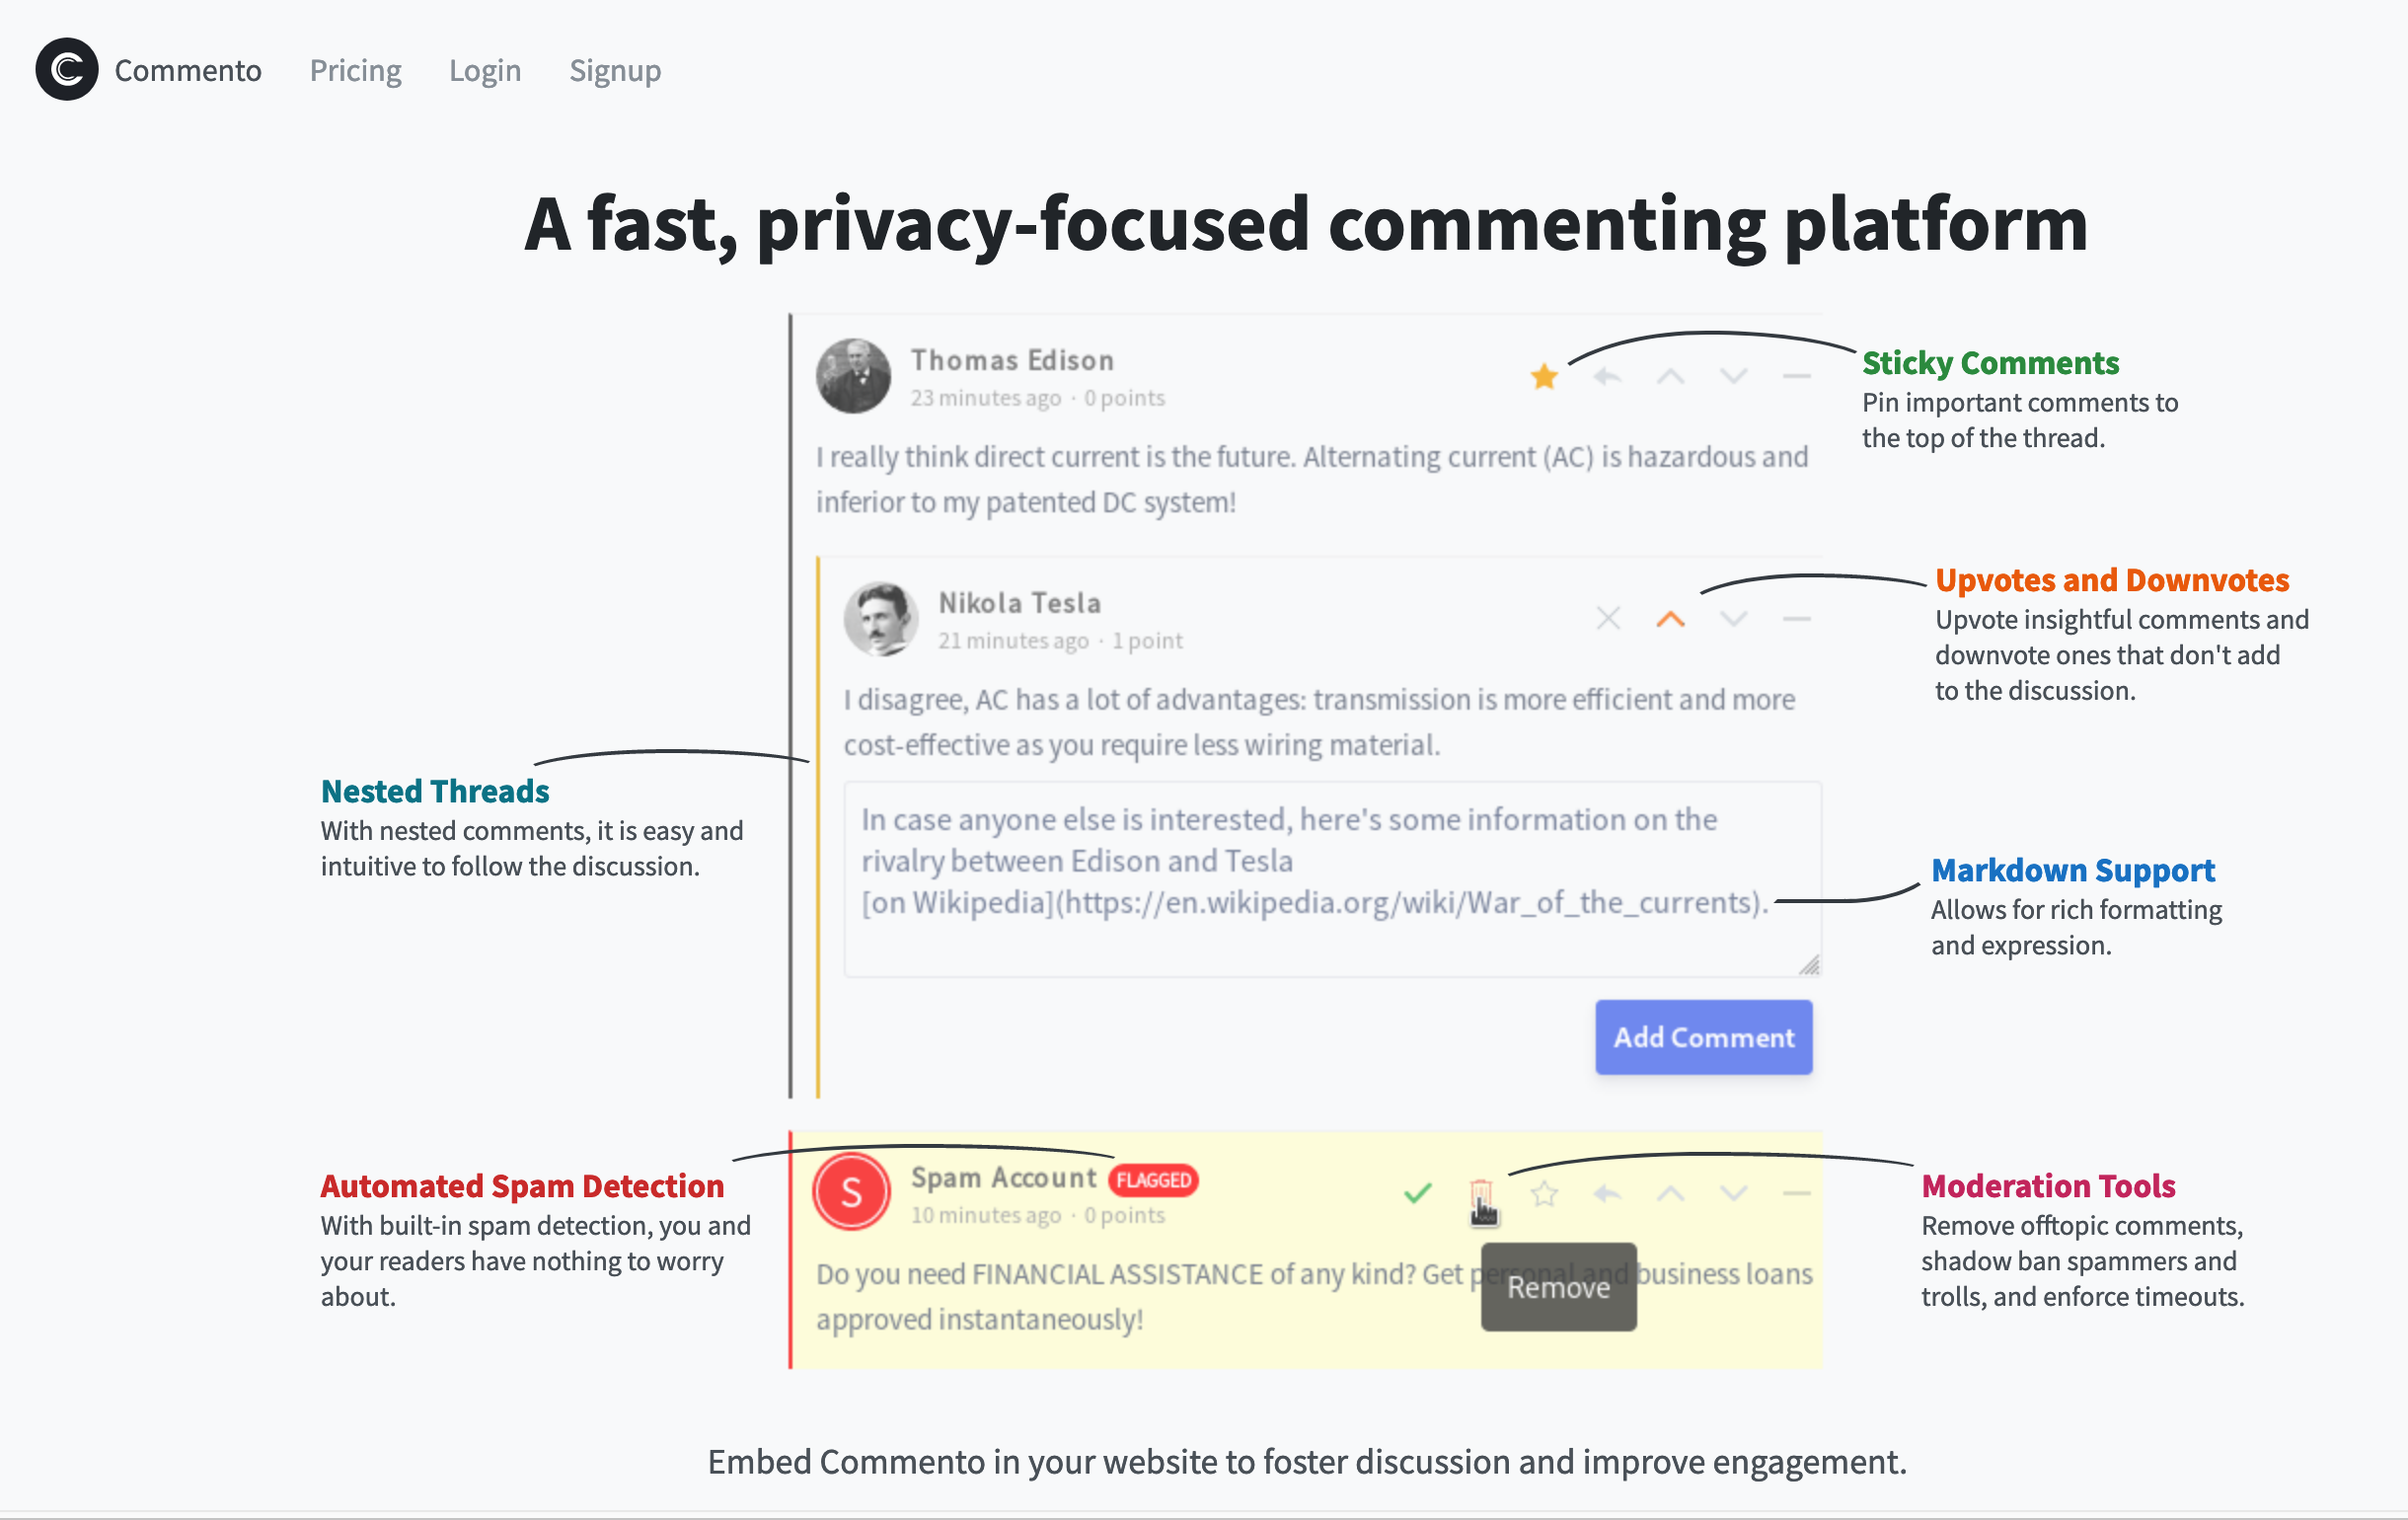 Commento: "A fast, privacy-focused commenting platform"